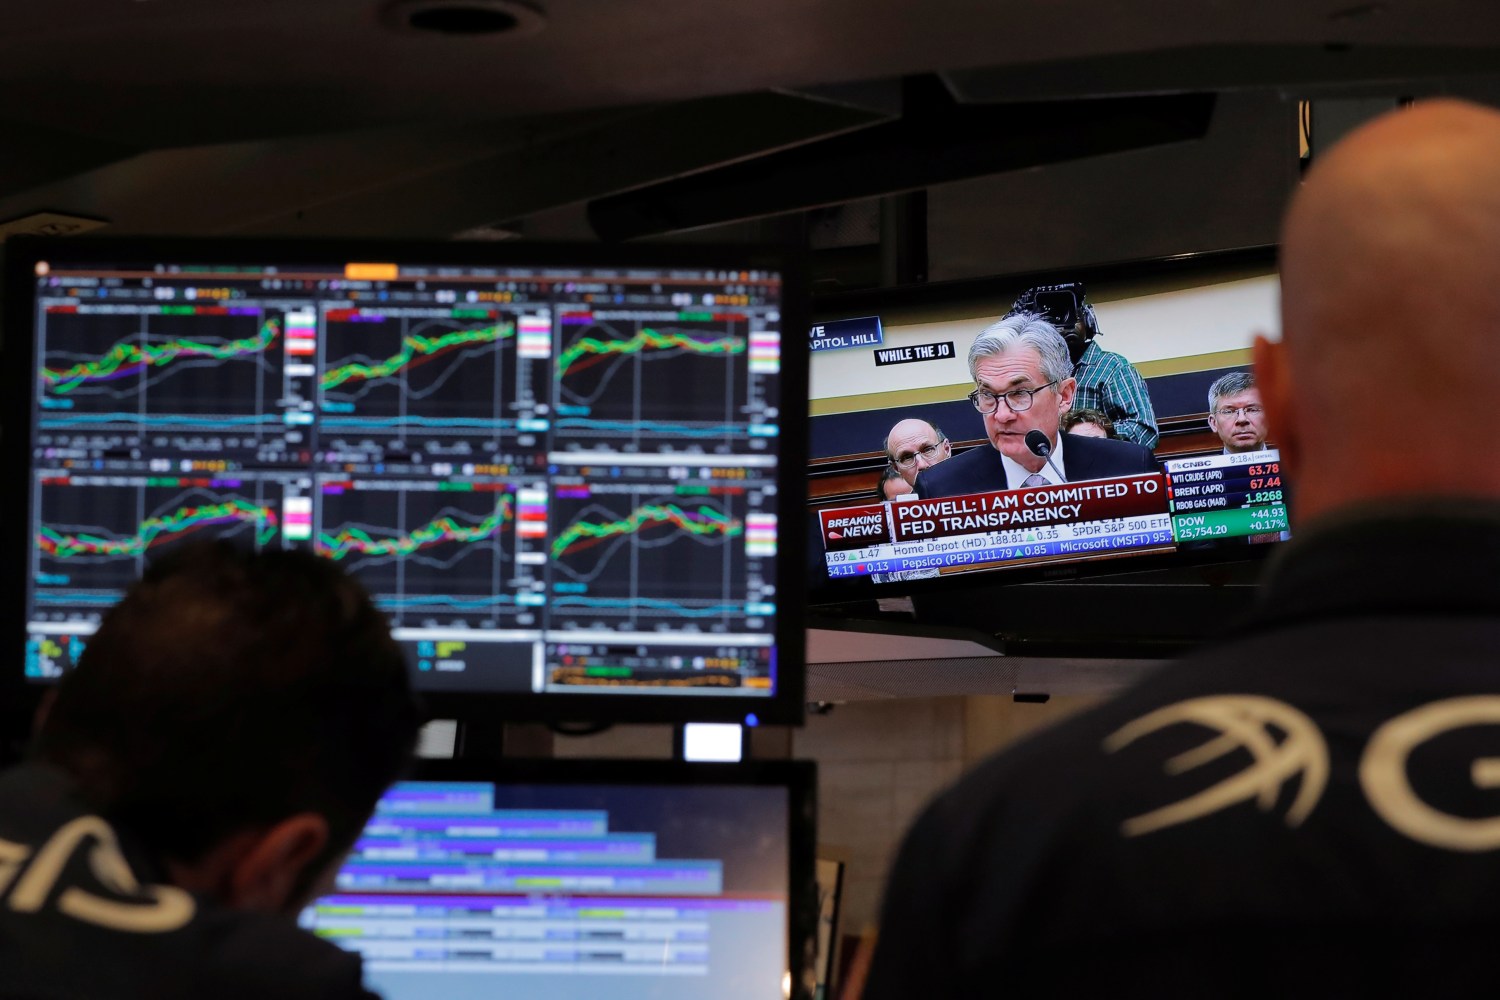 Federal Reserve Chairman Jerome Powell speaks on a television as traders work on the floor of the New York Stock Exchange in New York, U.S., February 27, 2018.  REUTERS/Lucas Jackson - RC1371196FE0